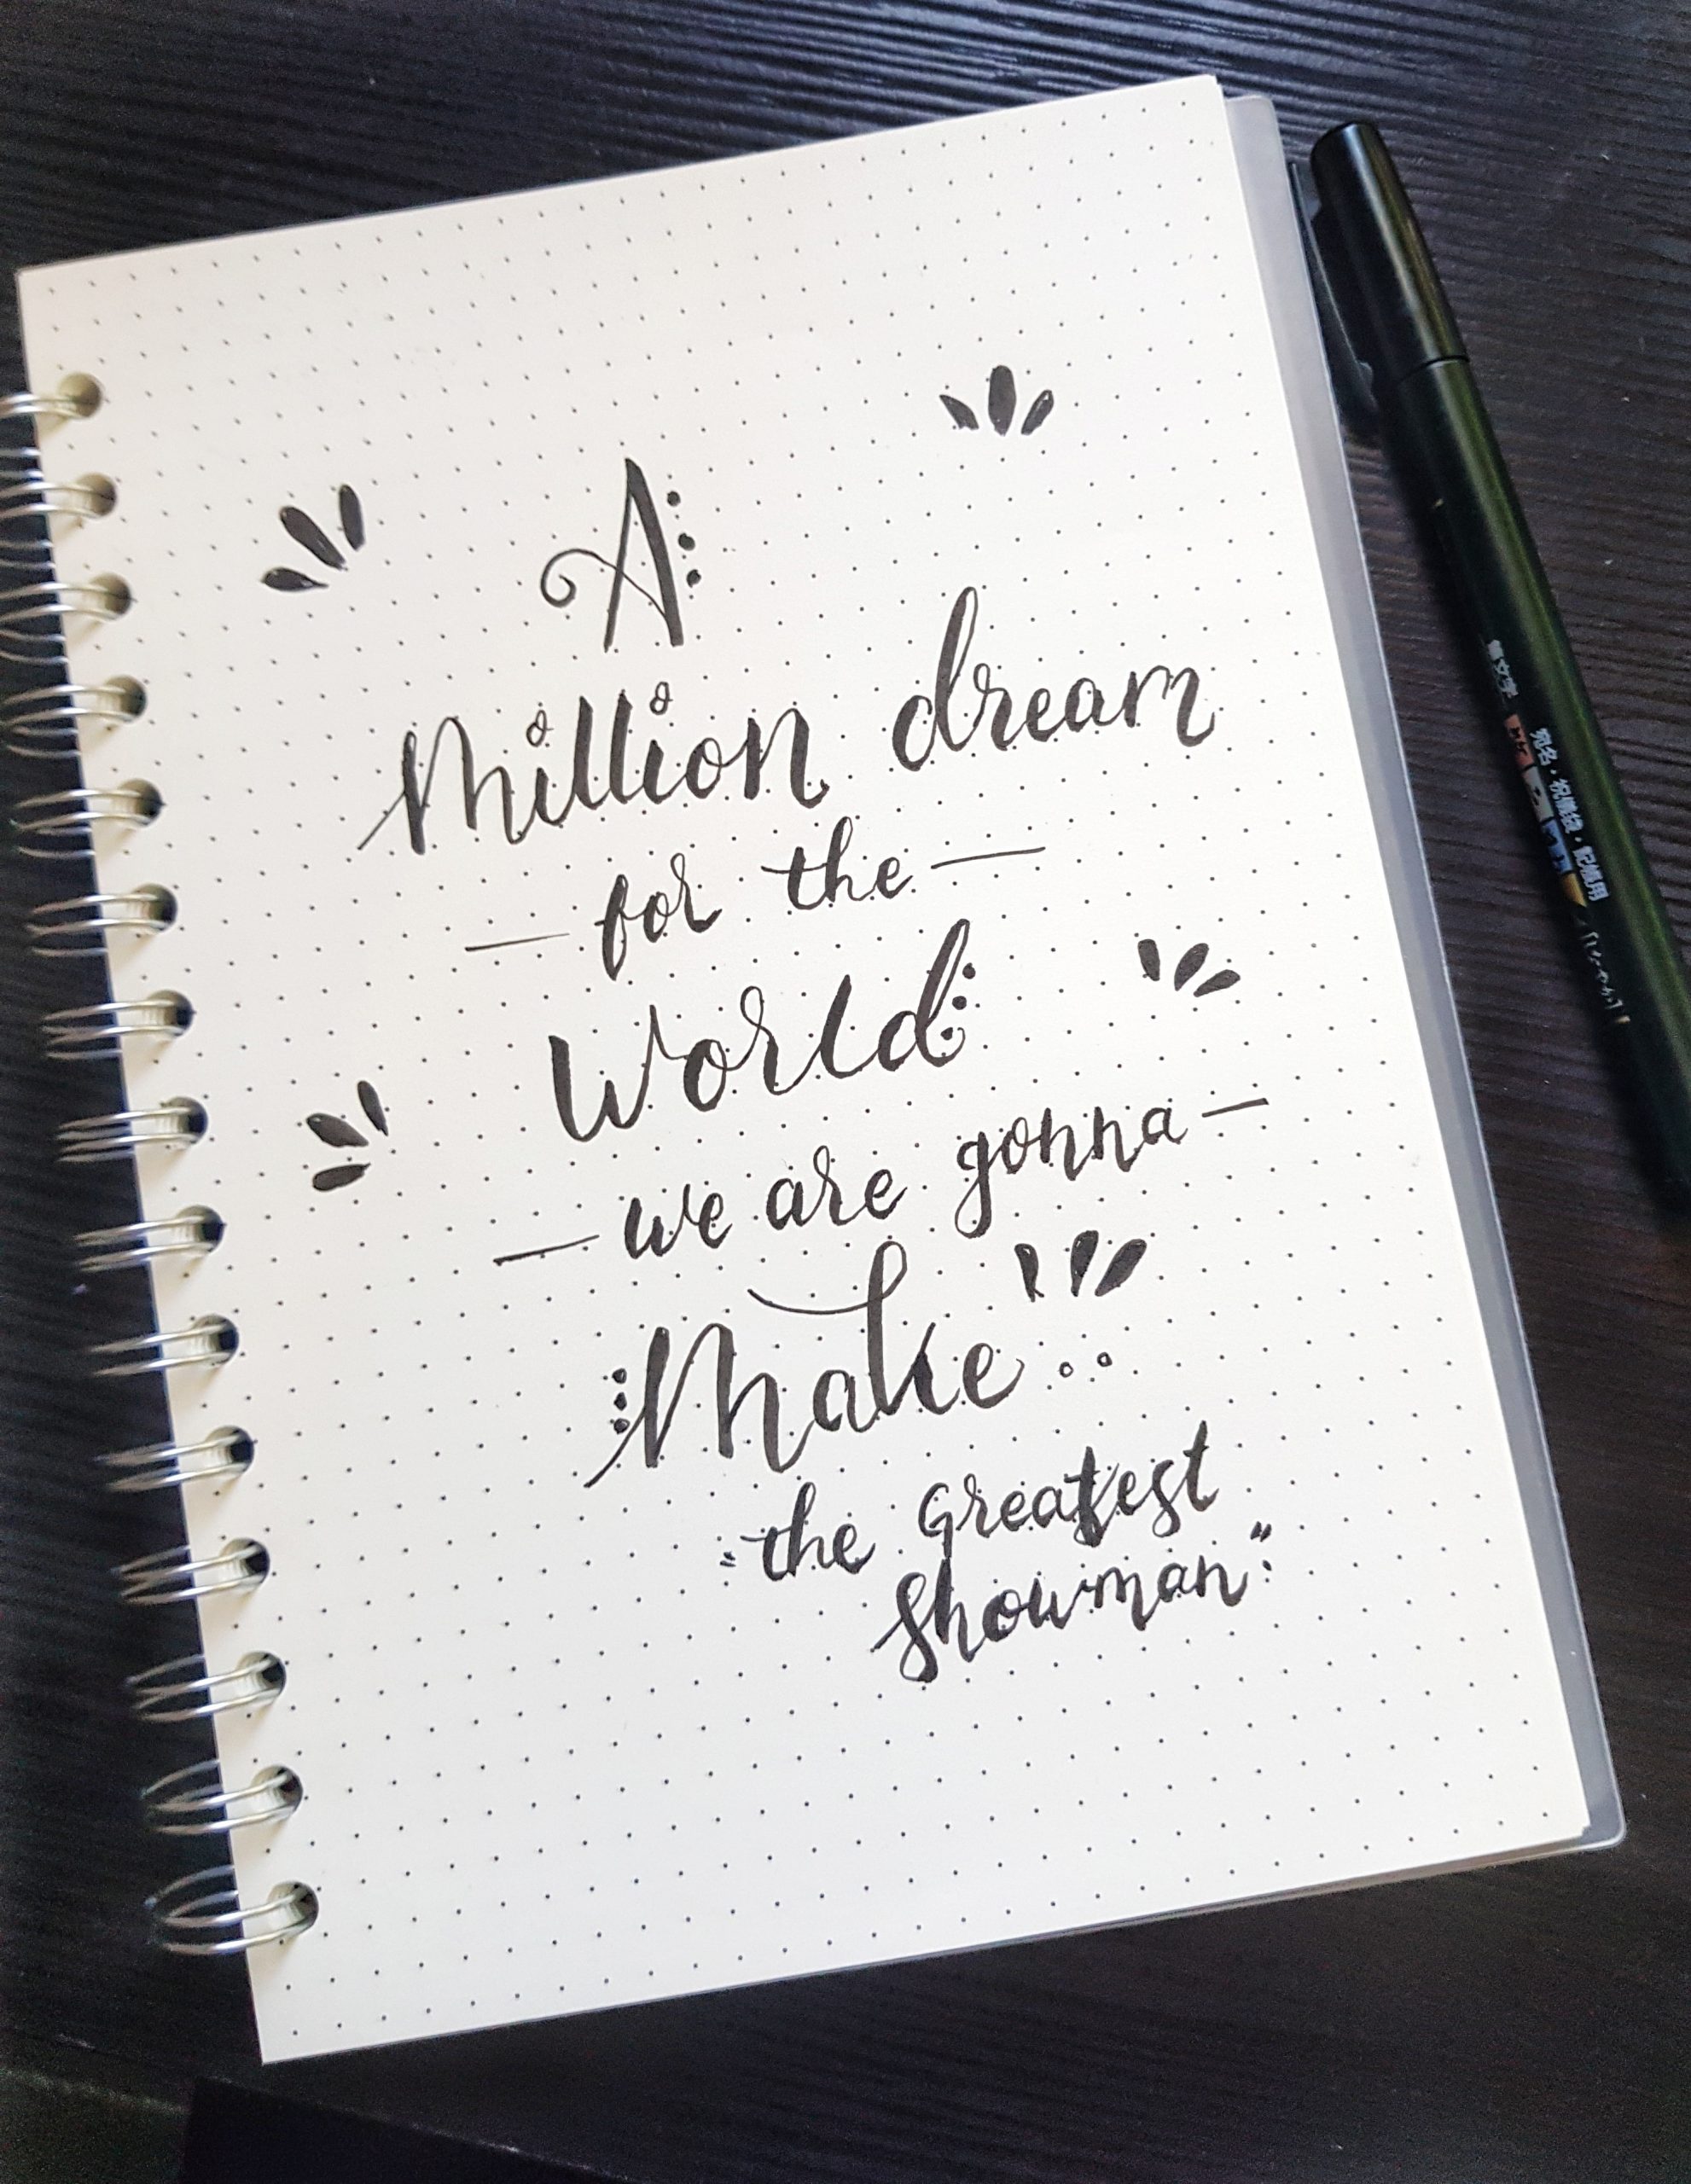 Calligraphy quotes/song